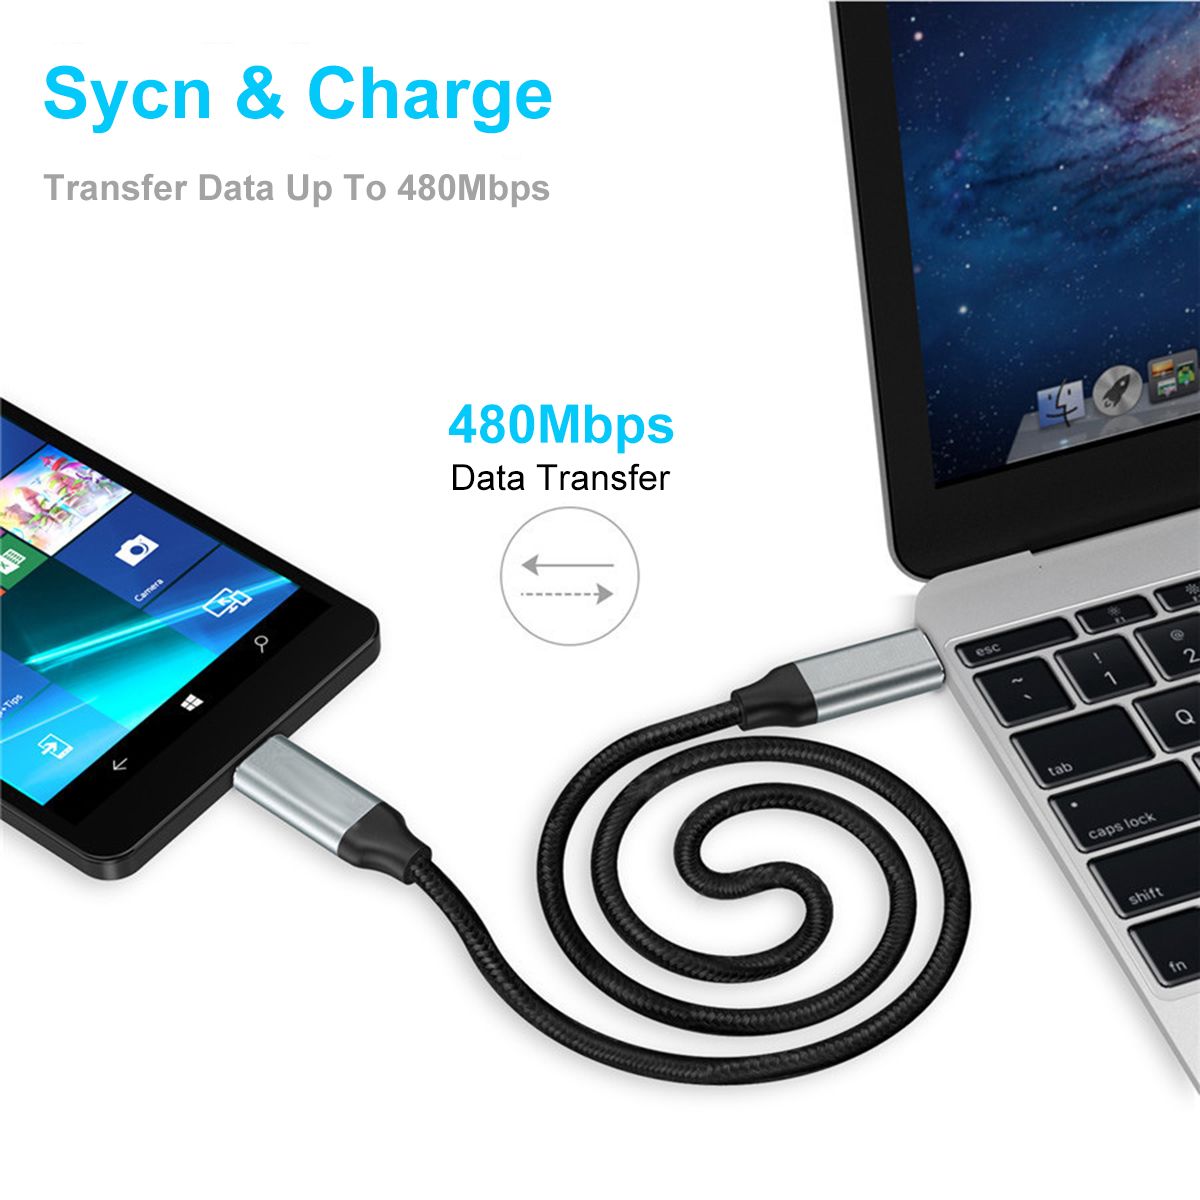 Bakeey-PD-60W-Data-Cable-USB-C-to-USB-C-Fast-Charging-For-Huawei-P30-P40-Pro-OnePlus-8Pro-1760081